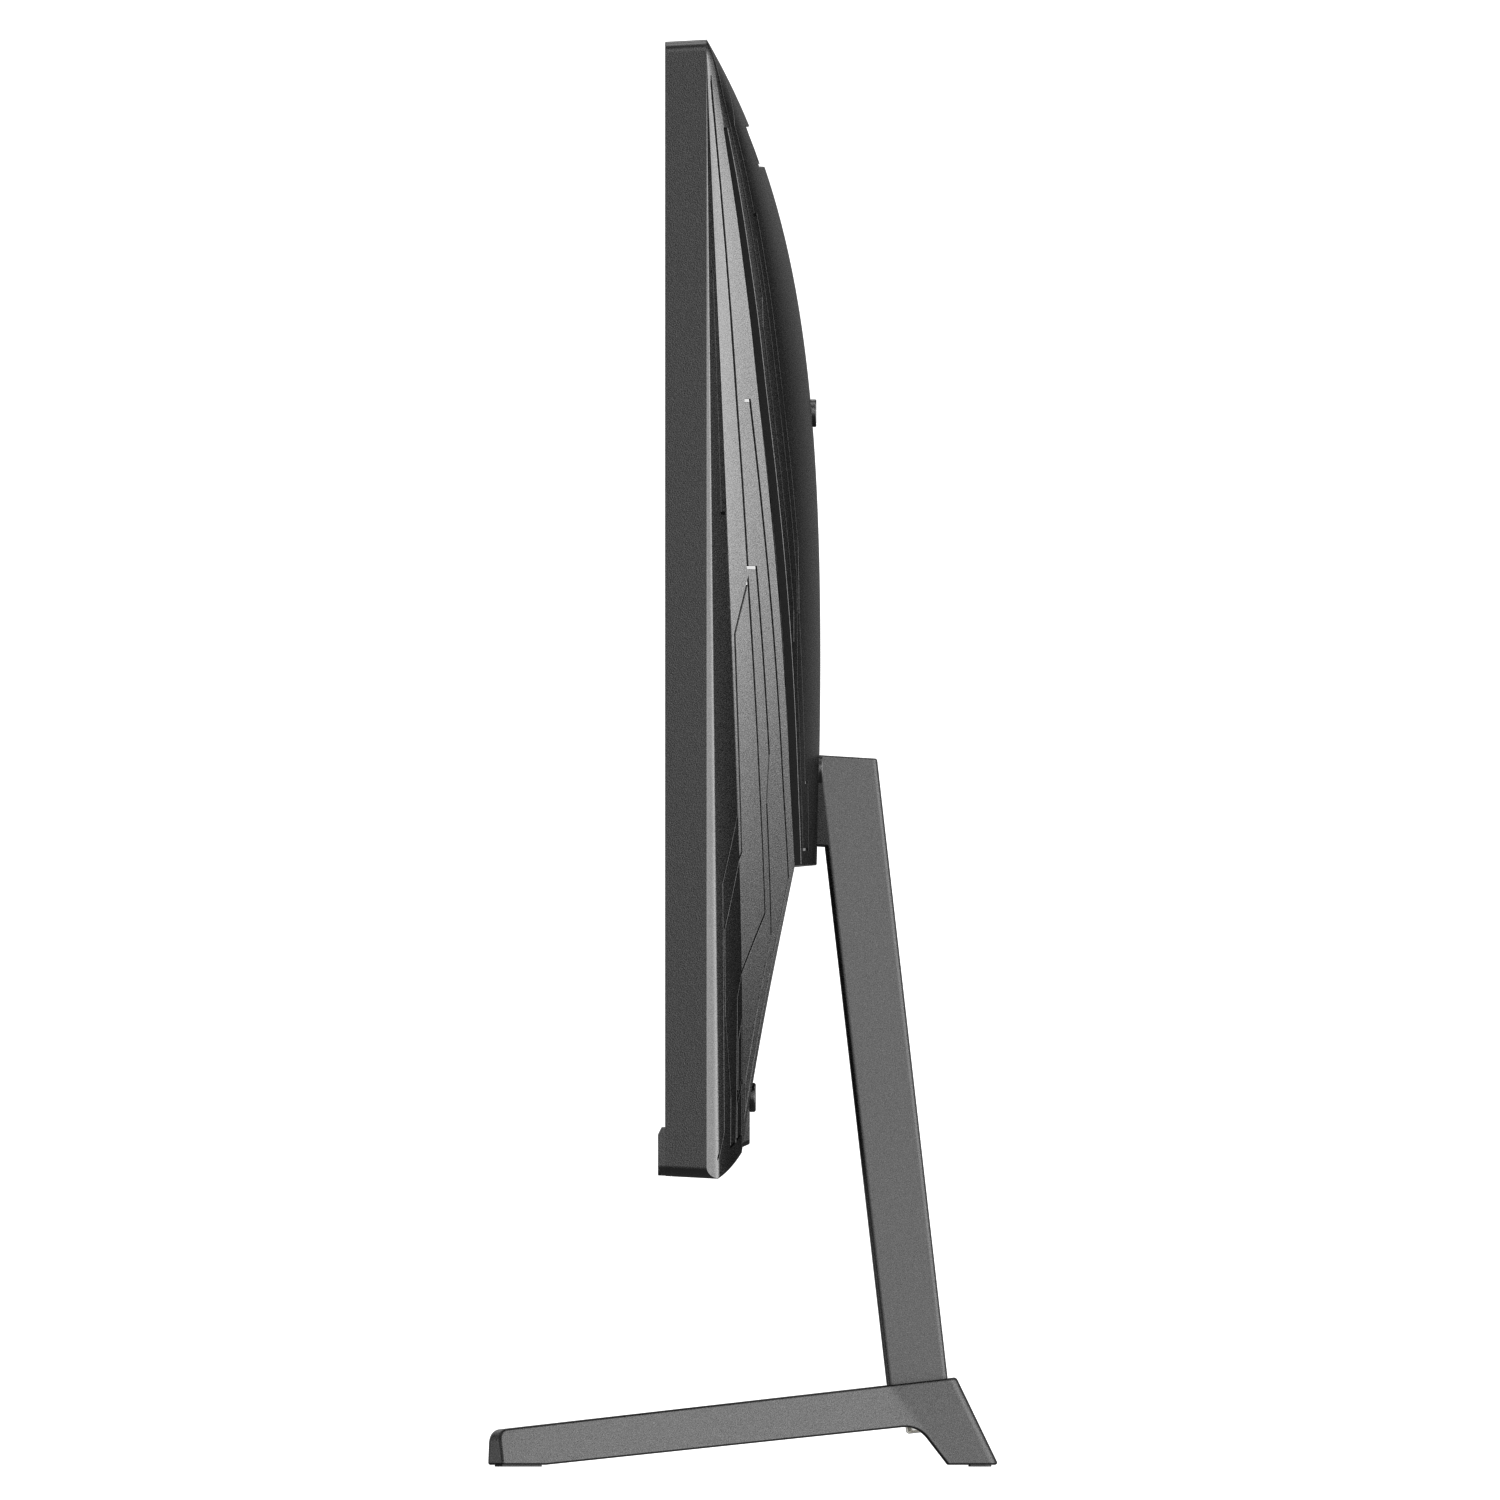 PX248 Prime Advanced Gaming Monitor